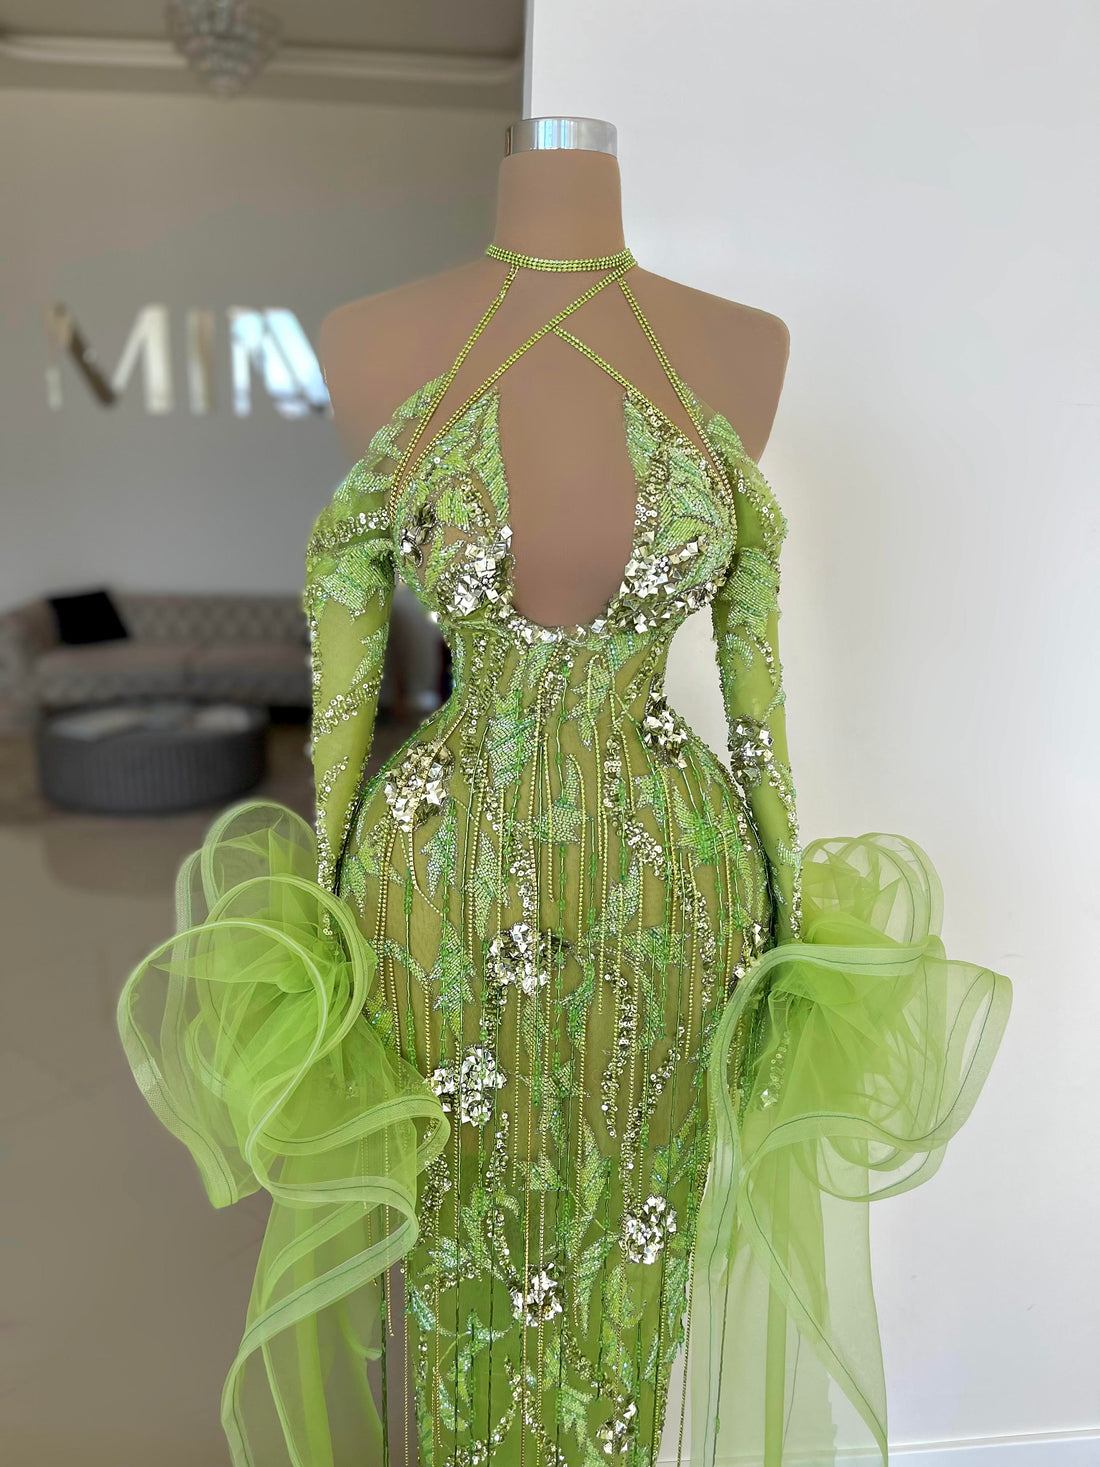 A green dress with glitter on a doll